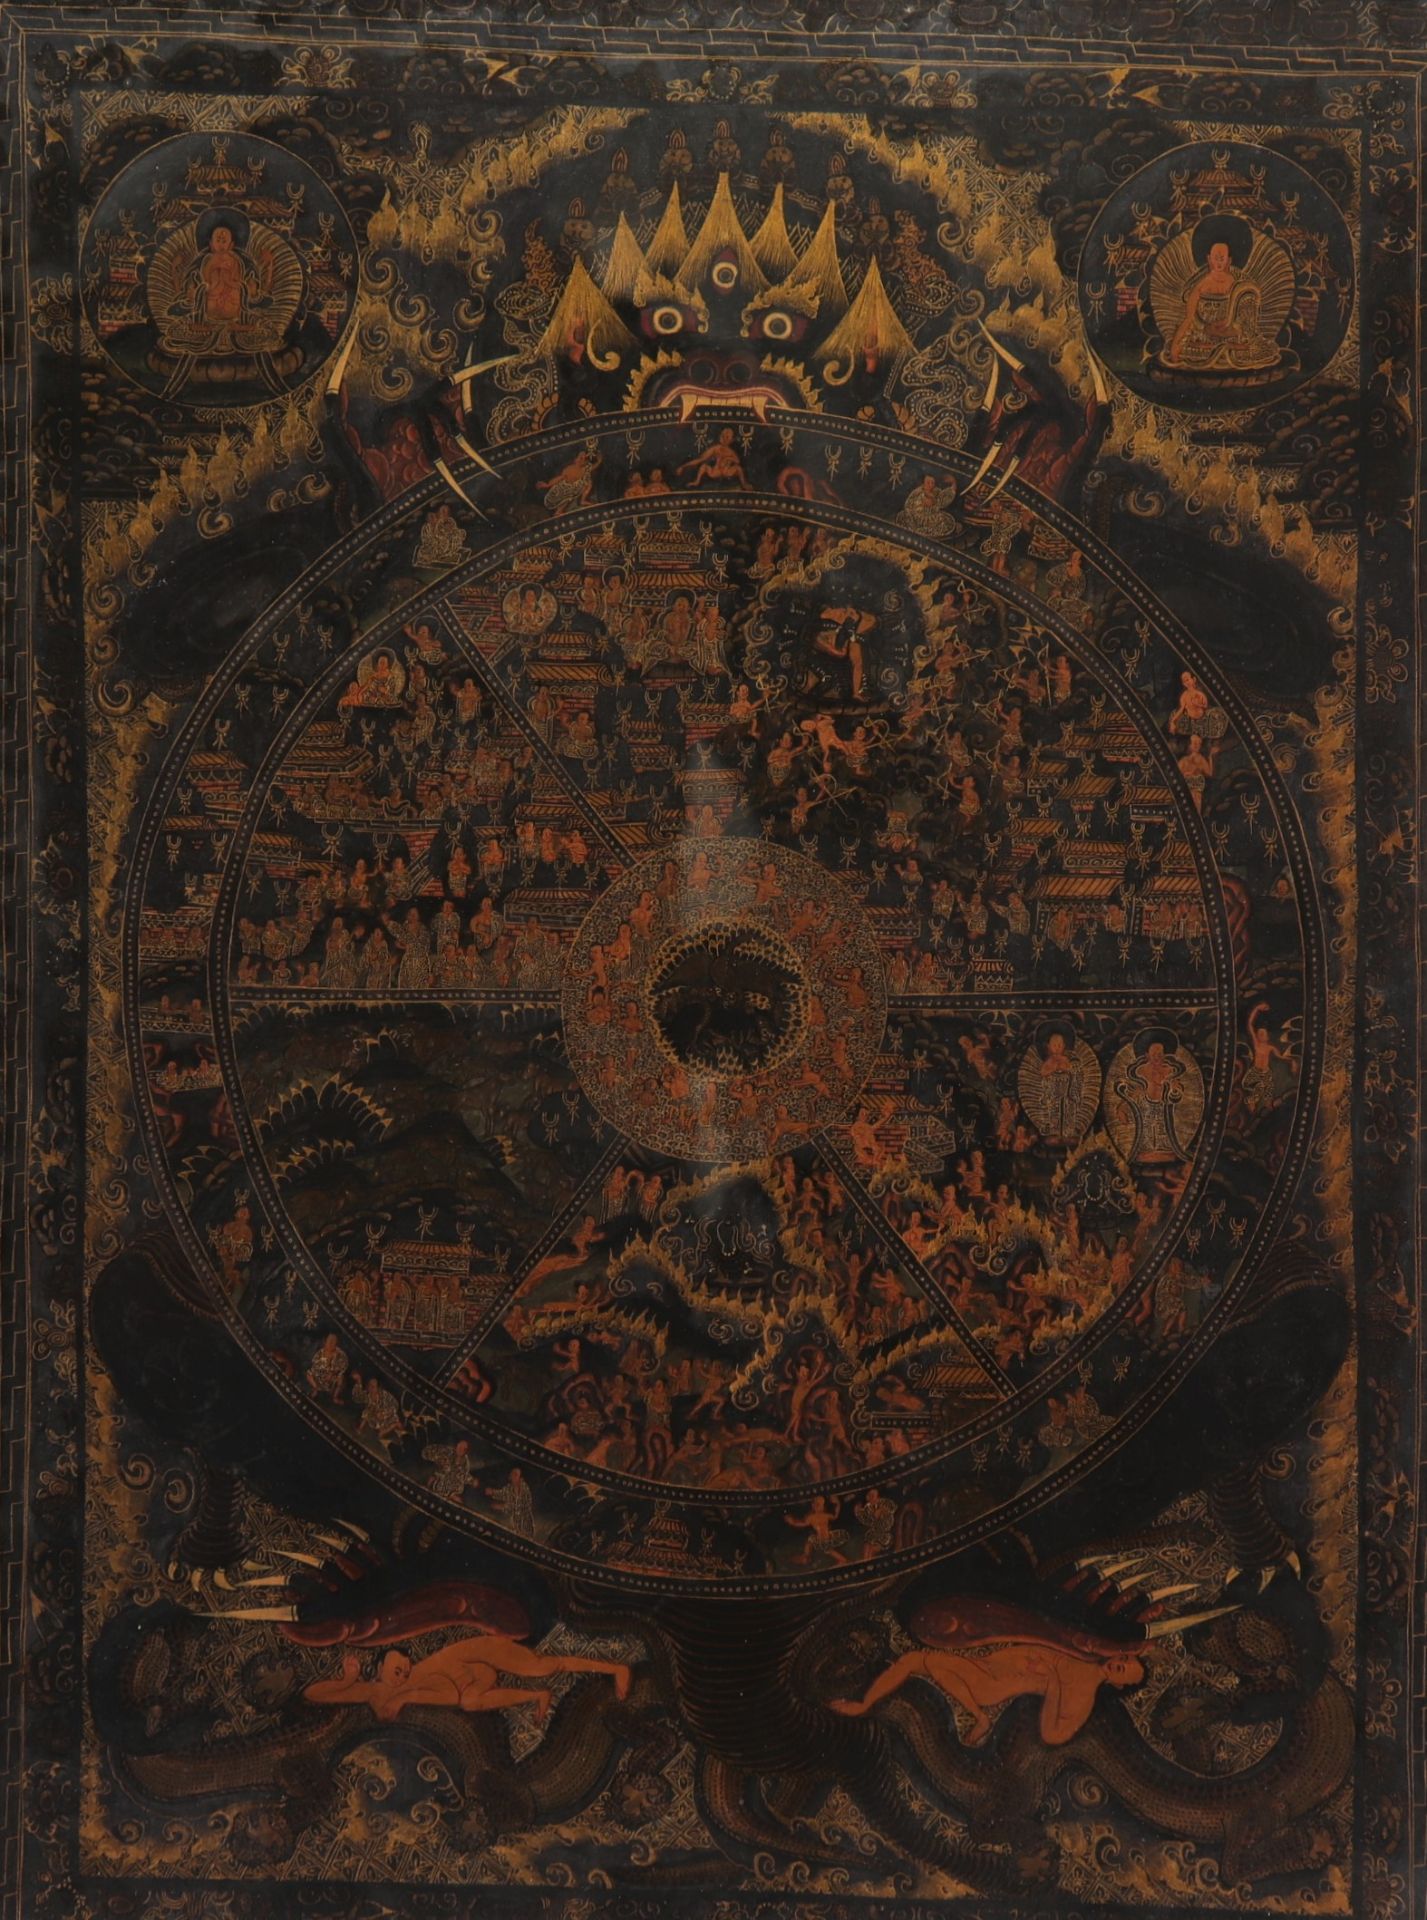 TANKA decorated with characters on a black background